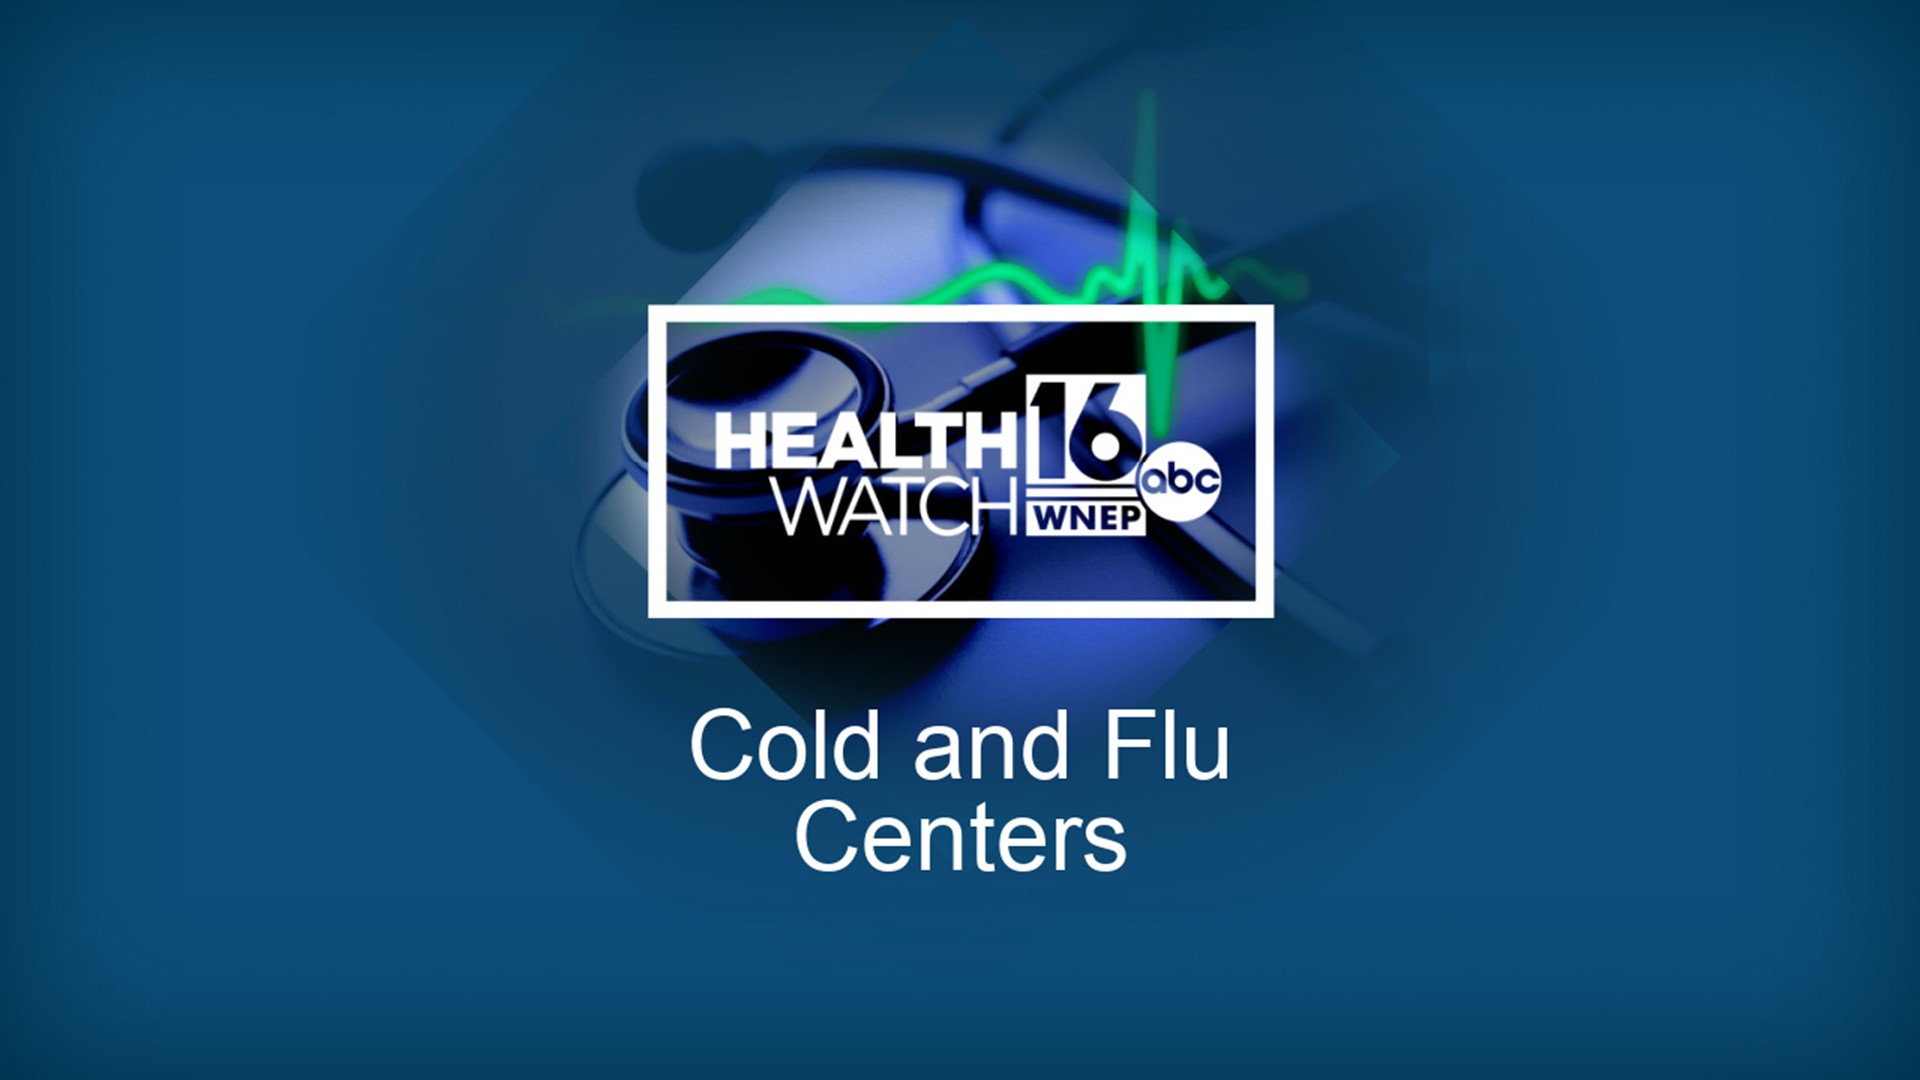 Geisinger has opened dedicated cold and flu centers, both to treat people more efficiently, and to keep possible flu or coronavirus cases away from everyone else.